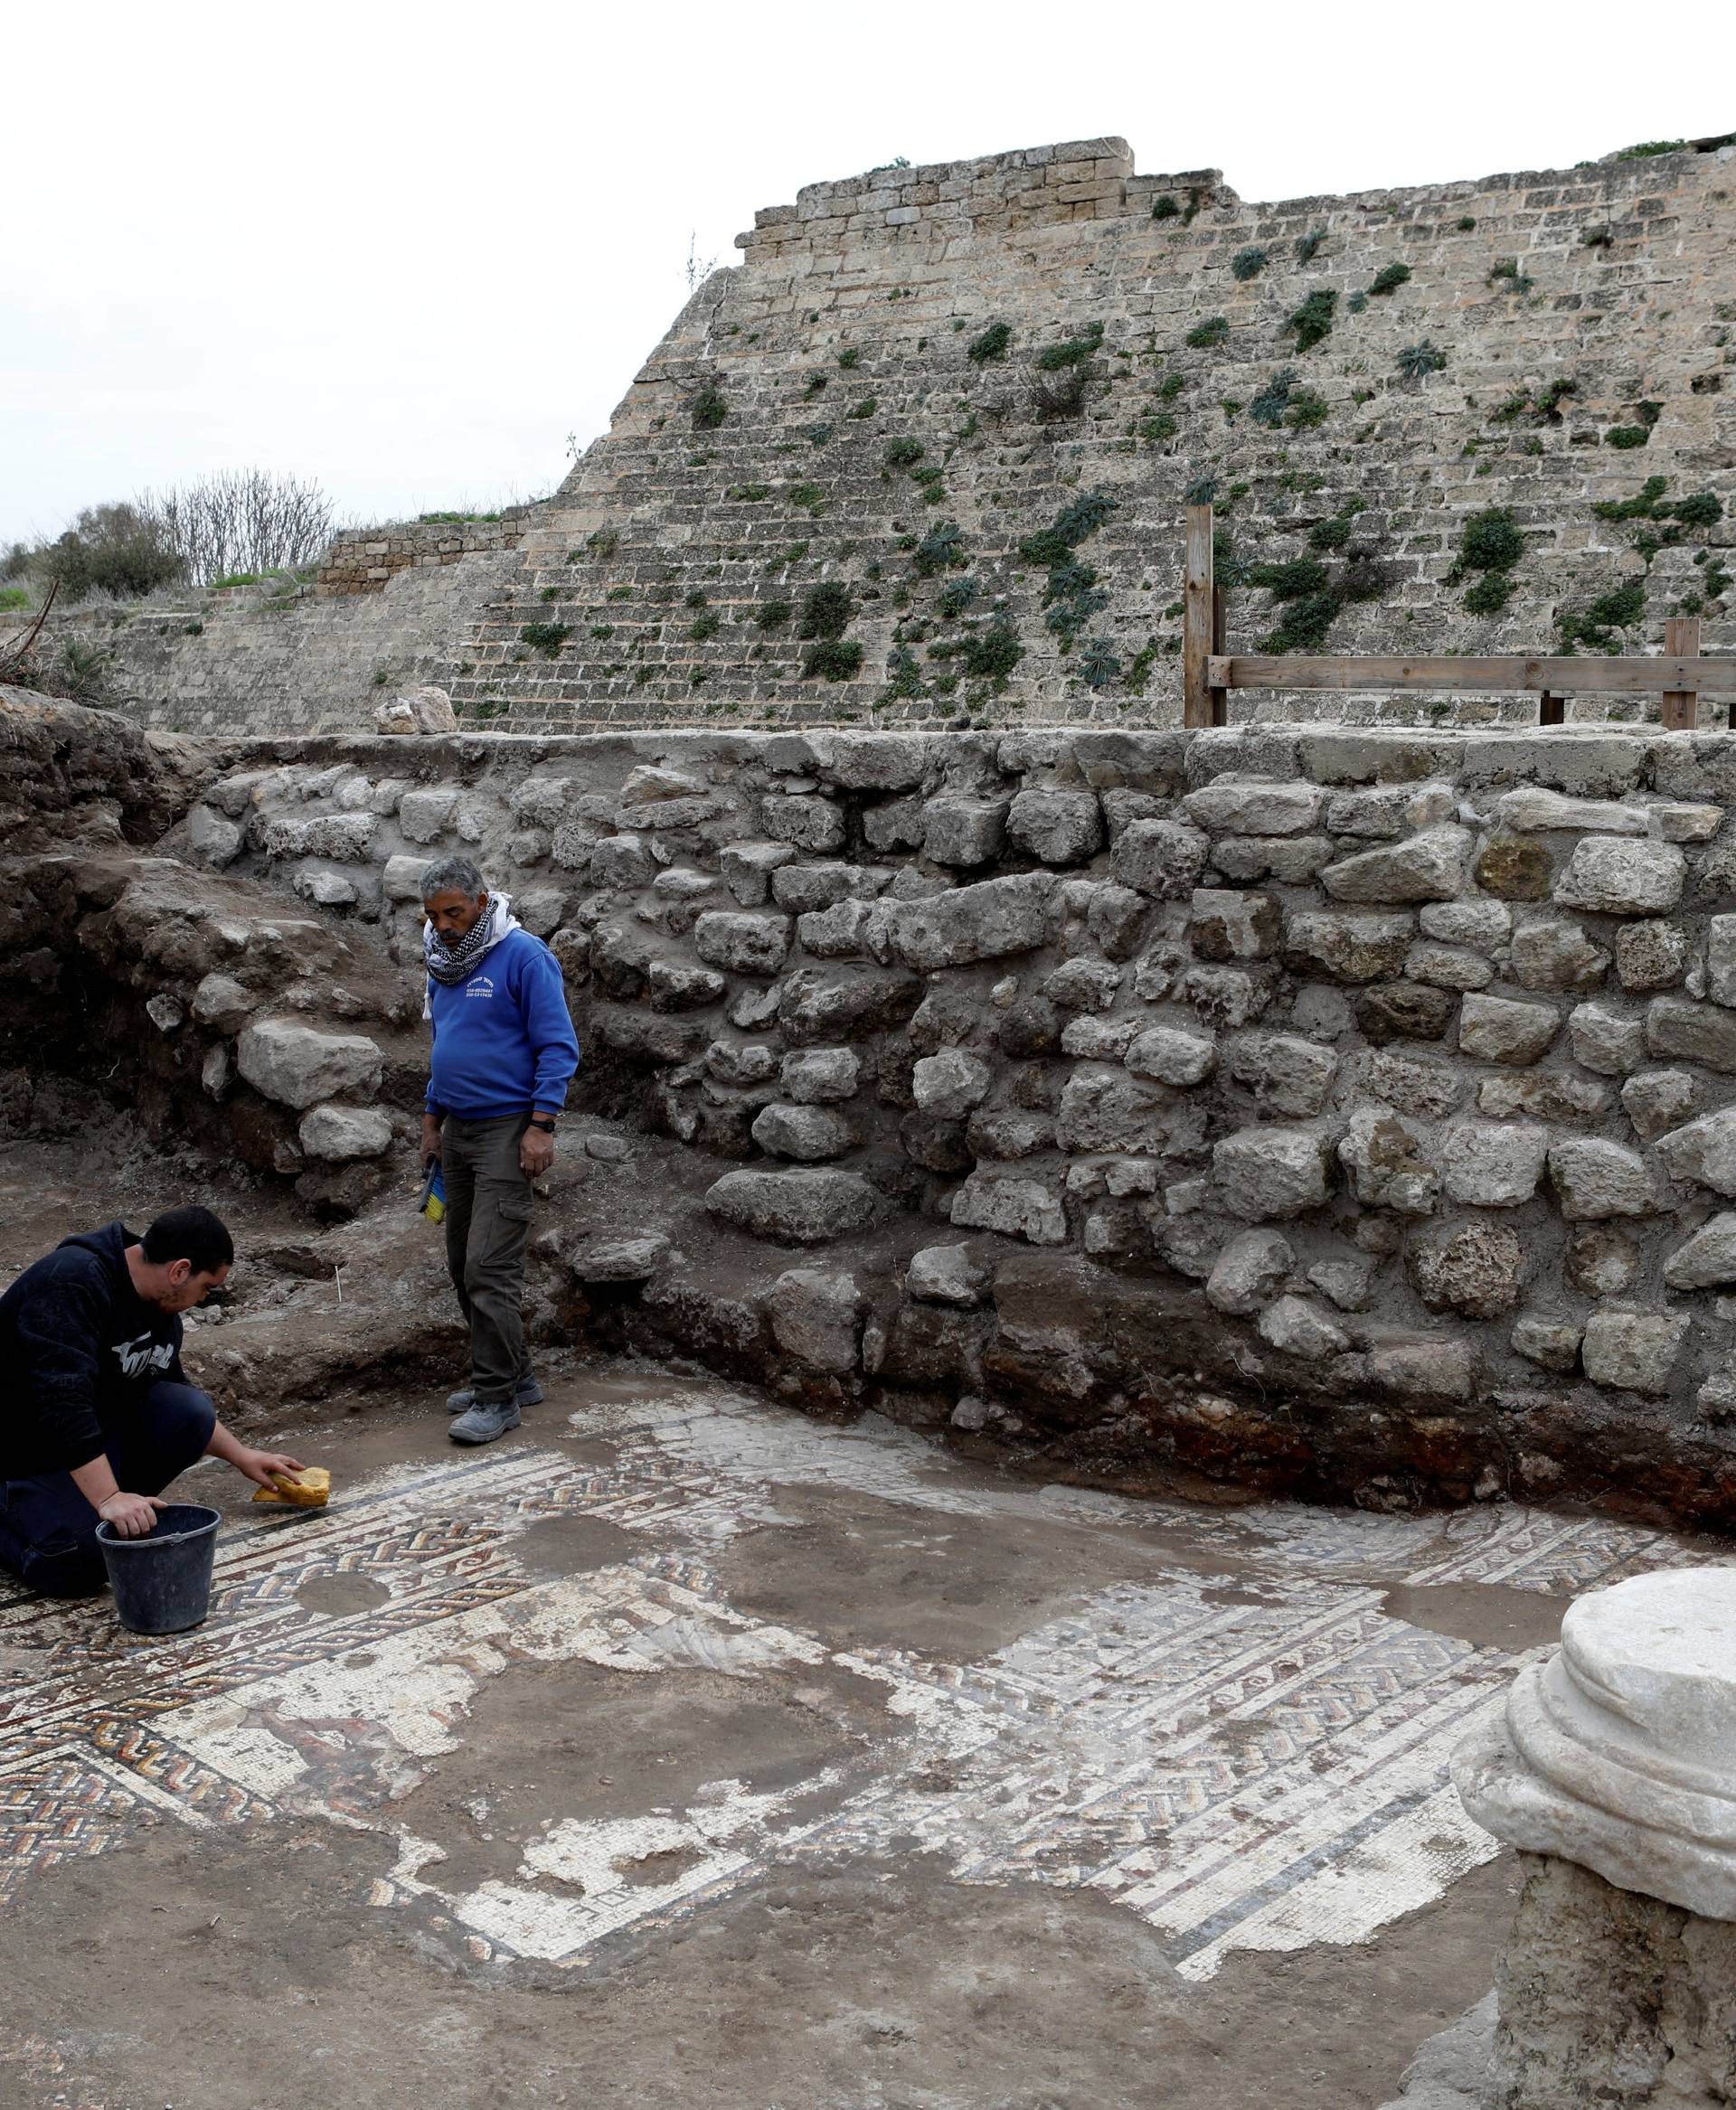 Israel Antiquities Authority workers clean a mosaic floor decorated with figures, which archaeologists say is 1,800 years old and was unearthed during an excavation in Caesarea